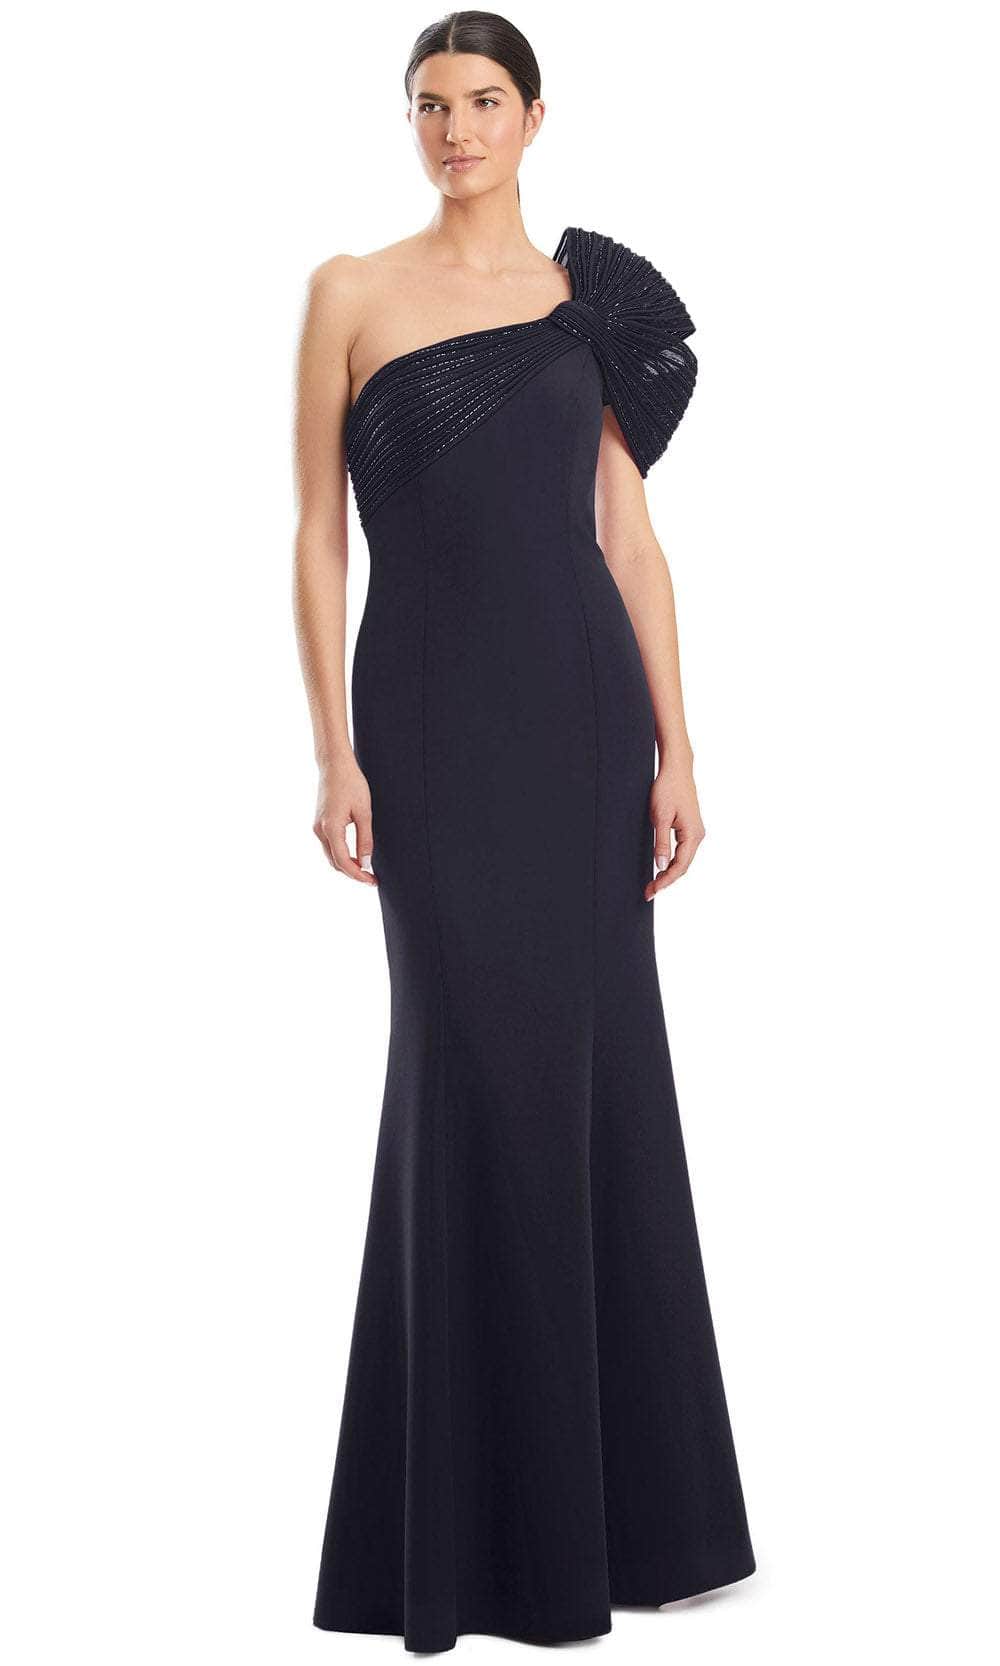 Image of Alexander by Daymor 1964S24 - Embellished Puff Sleeve Evening Dress